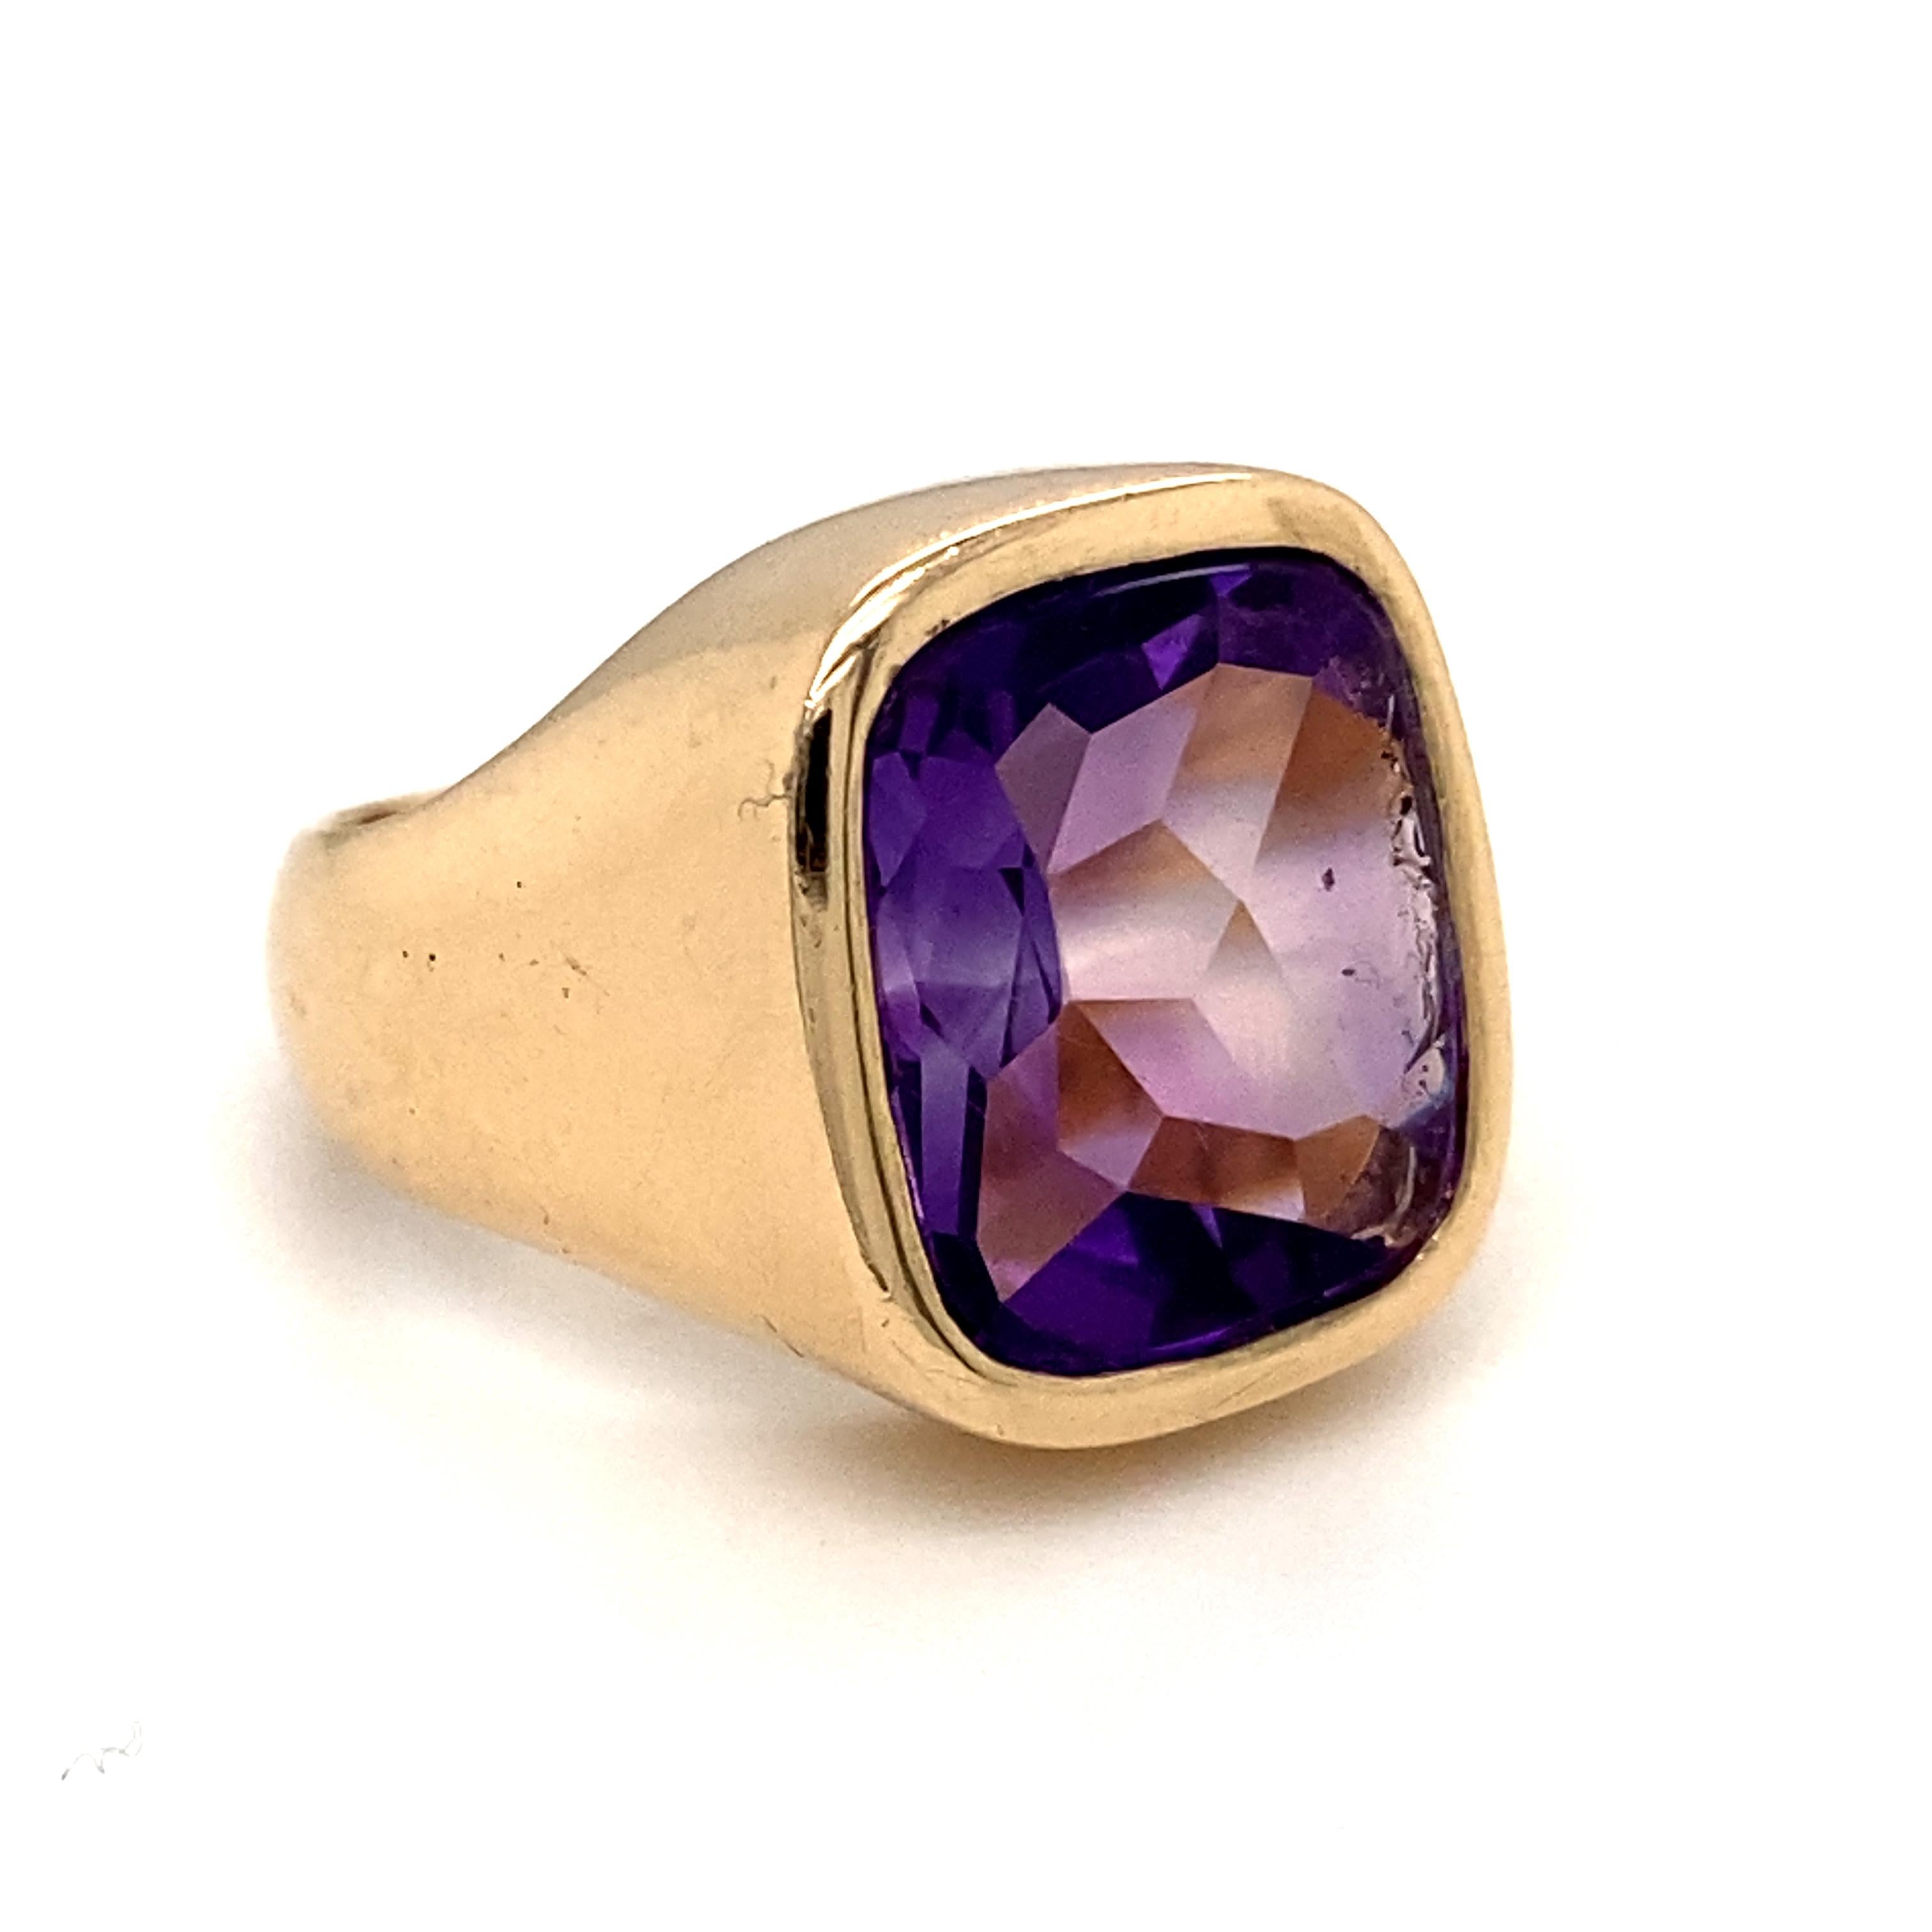 A vintage amethyst signet ring in 14 karat yellow gold, circa 1980.

Formed as a cushion shape, and set with a faceted deep purple amethyst within a plain polished bezel to wide sloping gently curving shoulders.

This ring, is incredibly comfortable